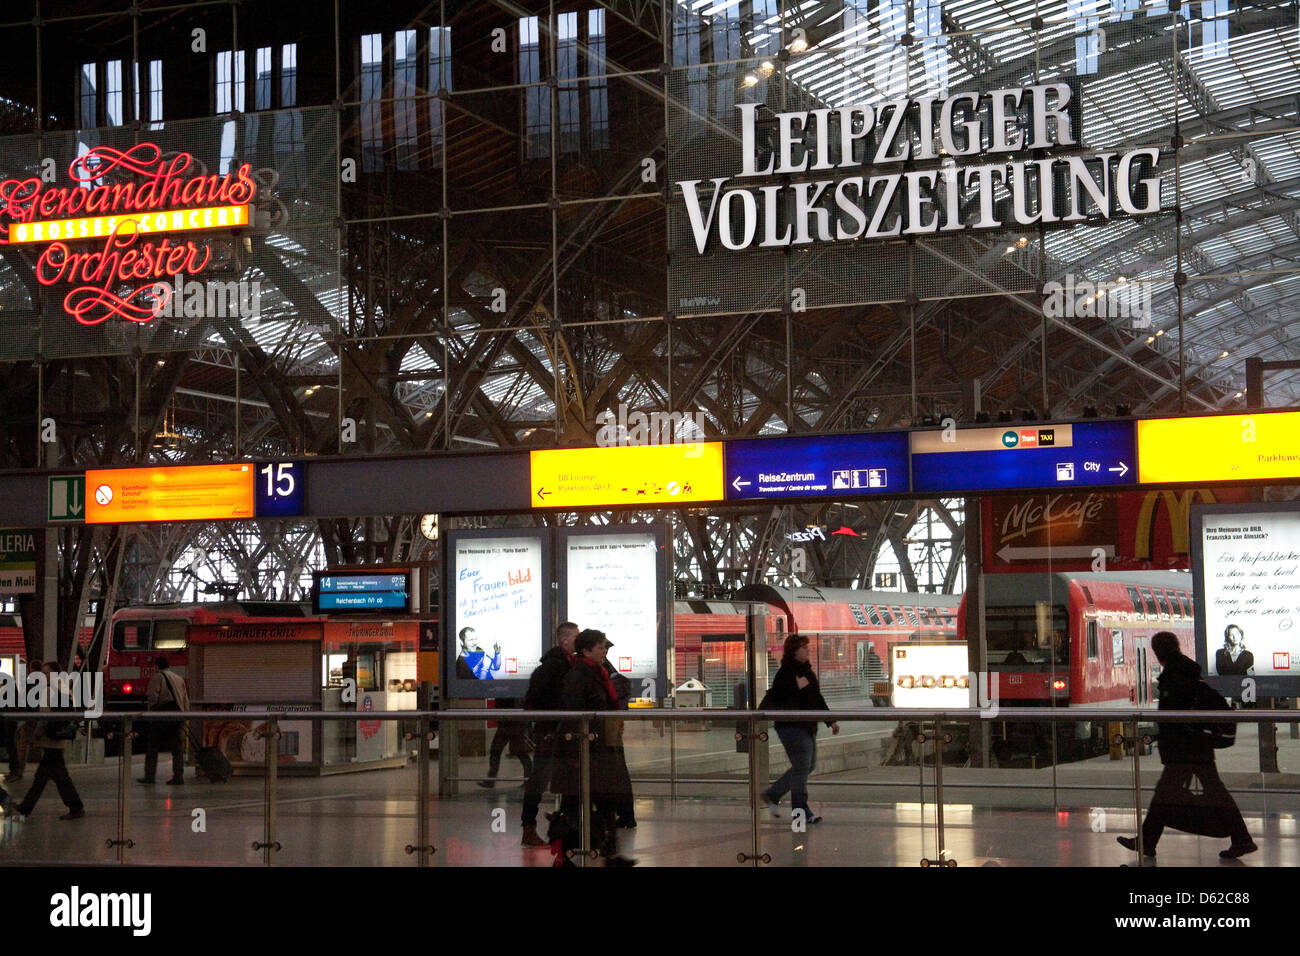 Leipzig, Germany's Central Station is among Europe's largest featuring a shopping mall with hundreds of stores. Stock Photo